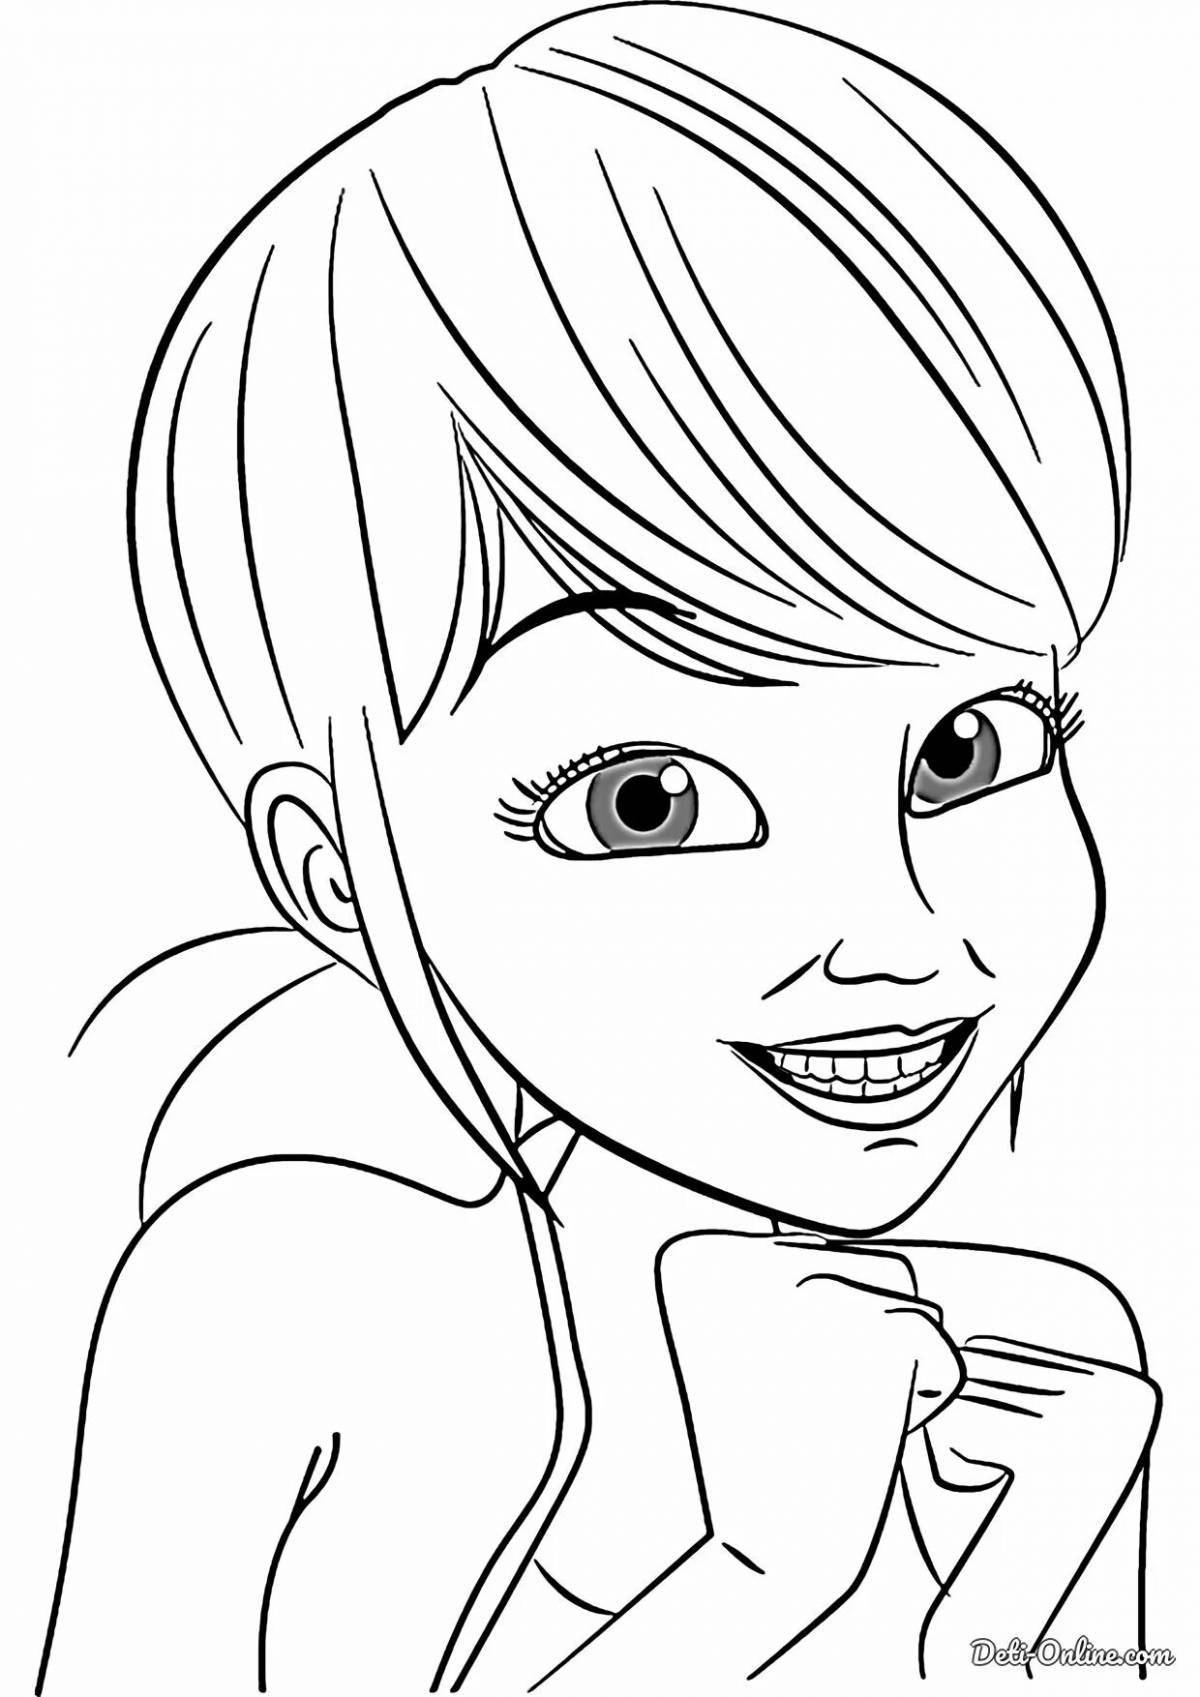 Chloe's live coloring page